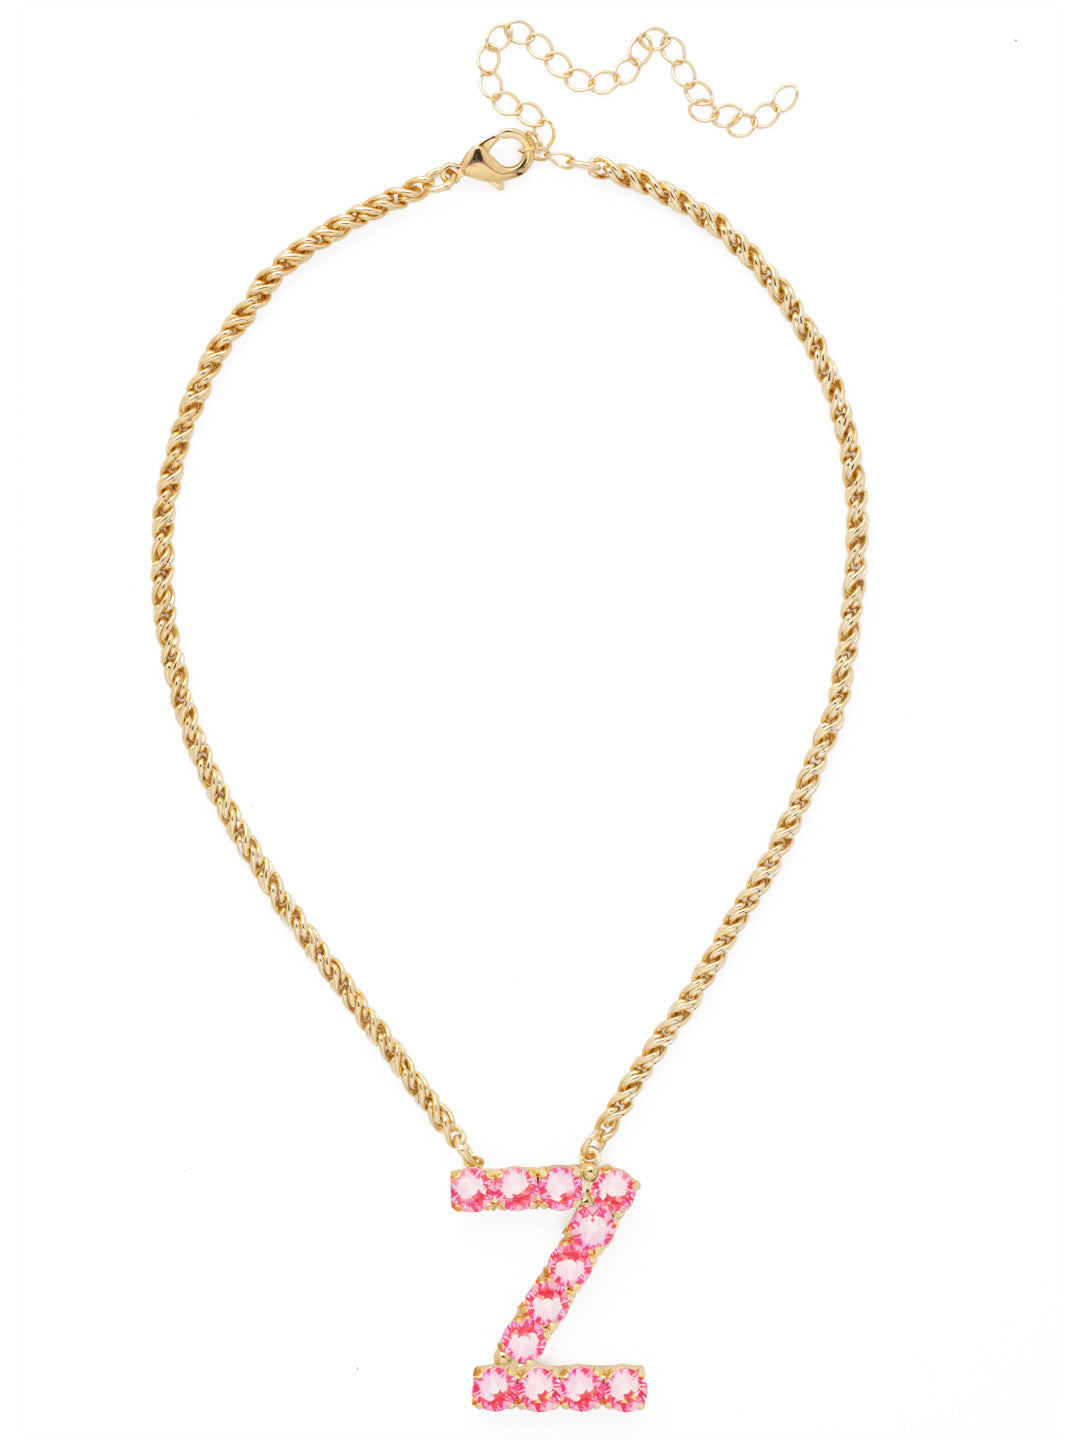 Z Initial Rope Pendant Necklace - NFK45BGETP - <p>The Initial Rope Pendant Necklace features a crystal encrusted metal monogram pendant on an adjustable rope chain, secured with a lobster claw clasp. From Sorrelli's Electric Pink collection in our Bright Gold-tone finish.</p>